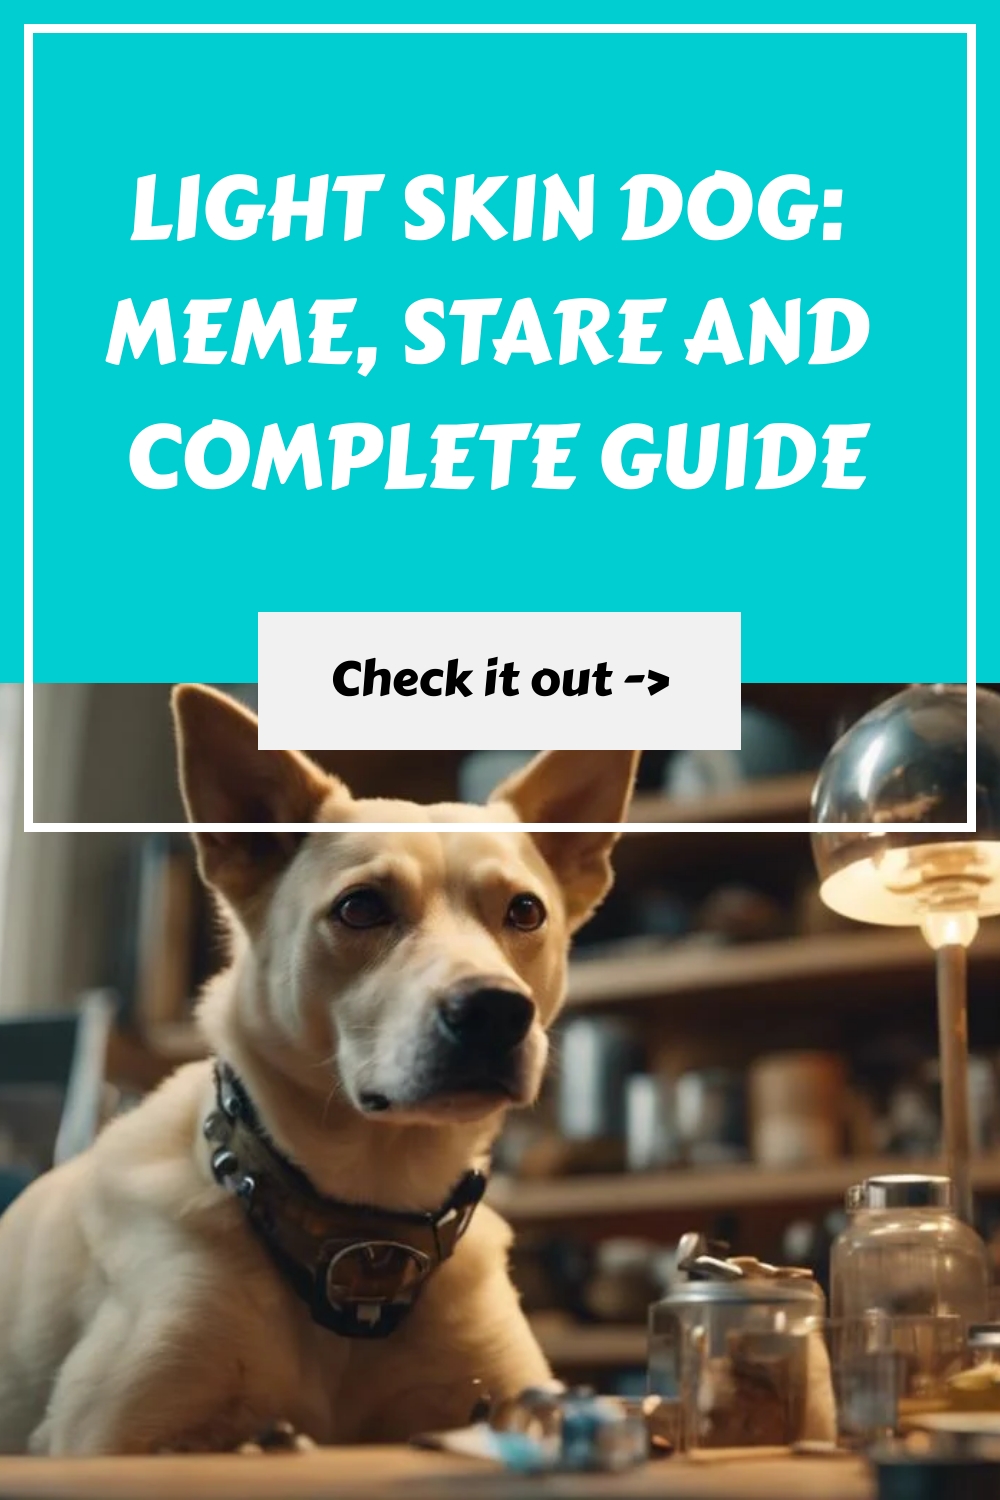 Light Skin Dog: Meme, Stare and Complete Guide